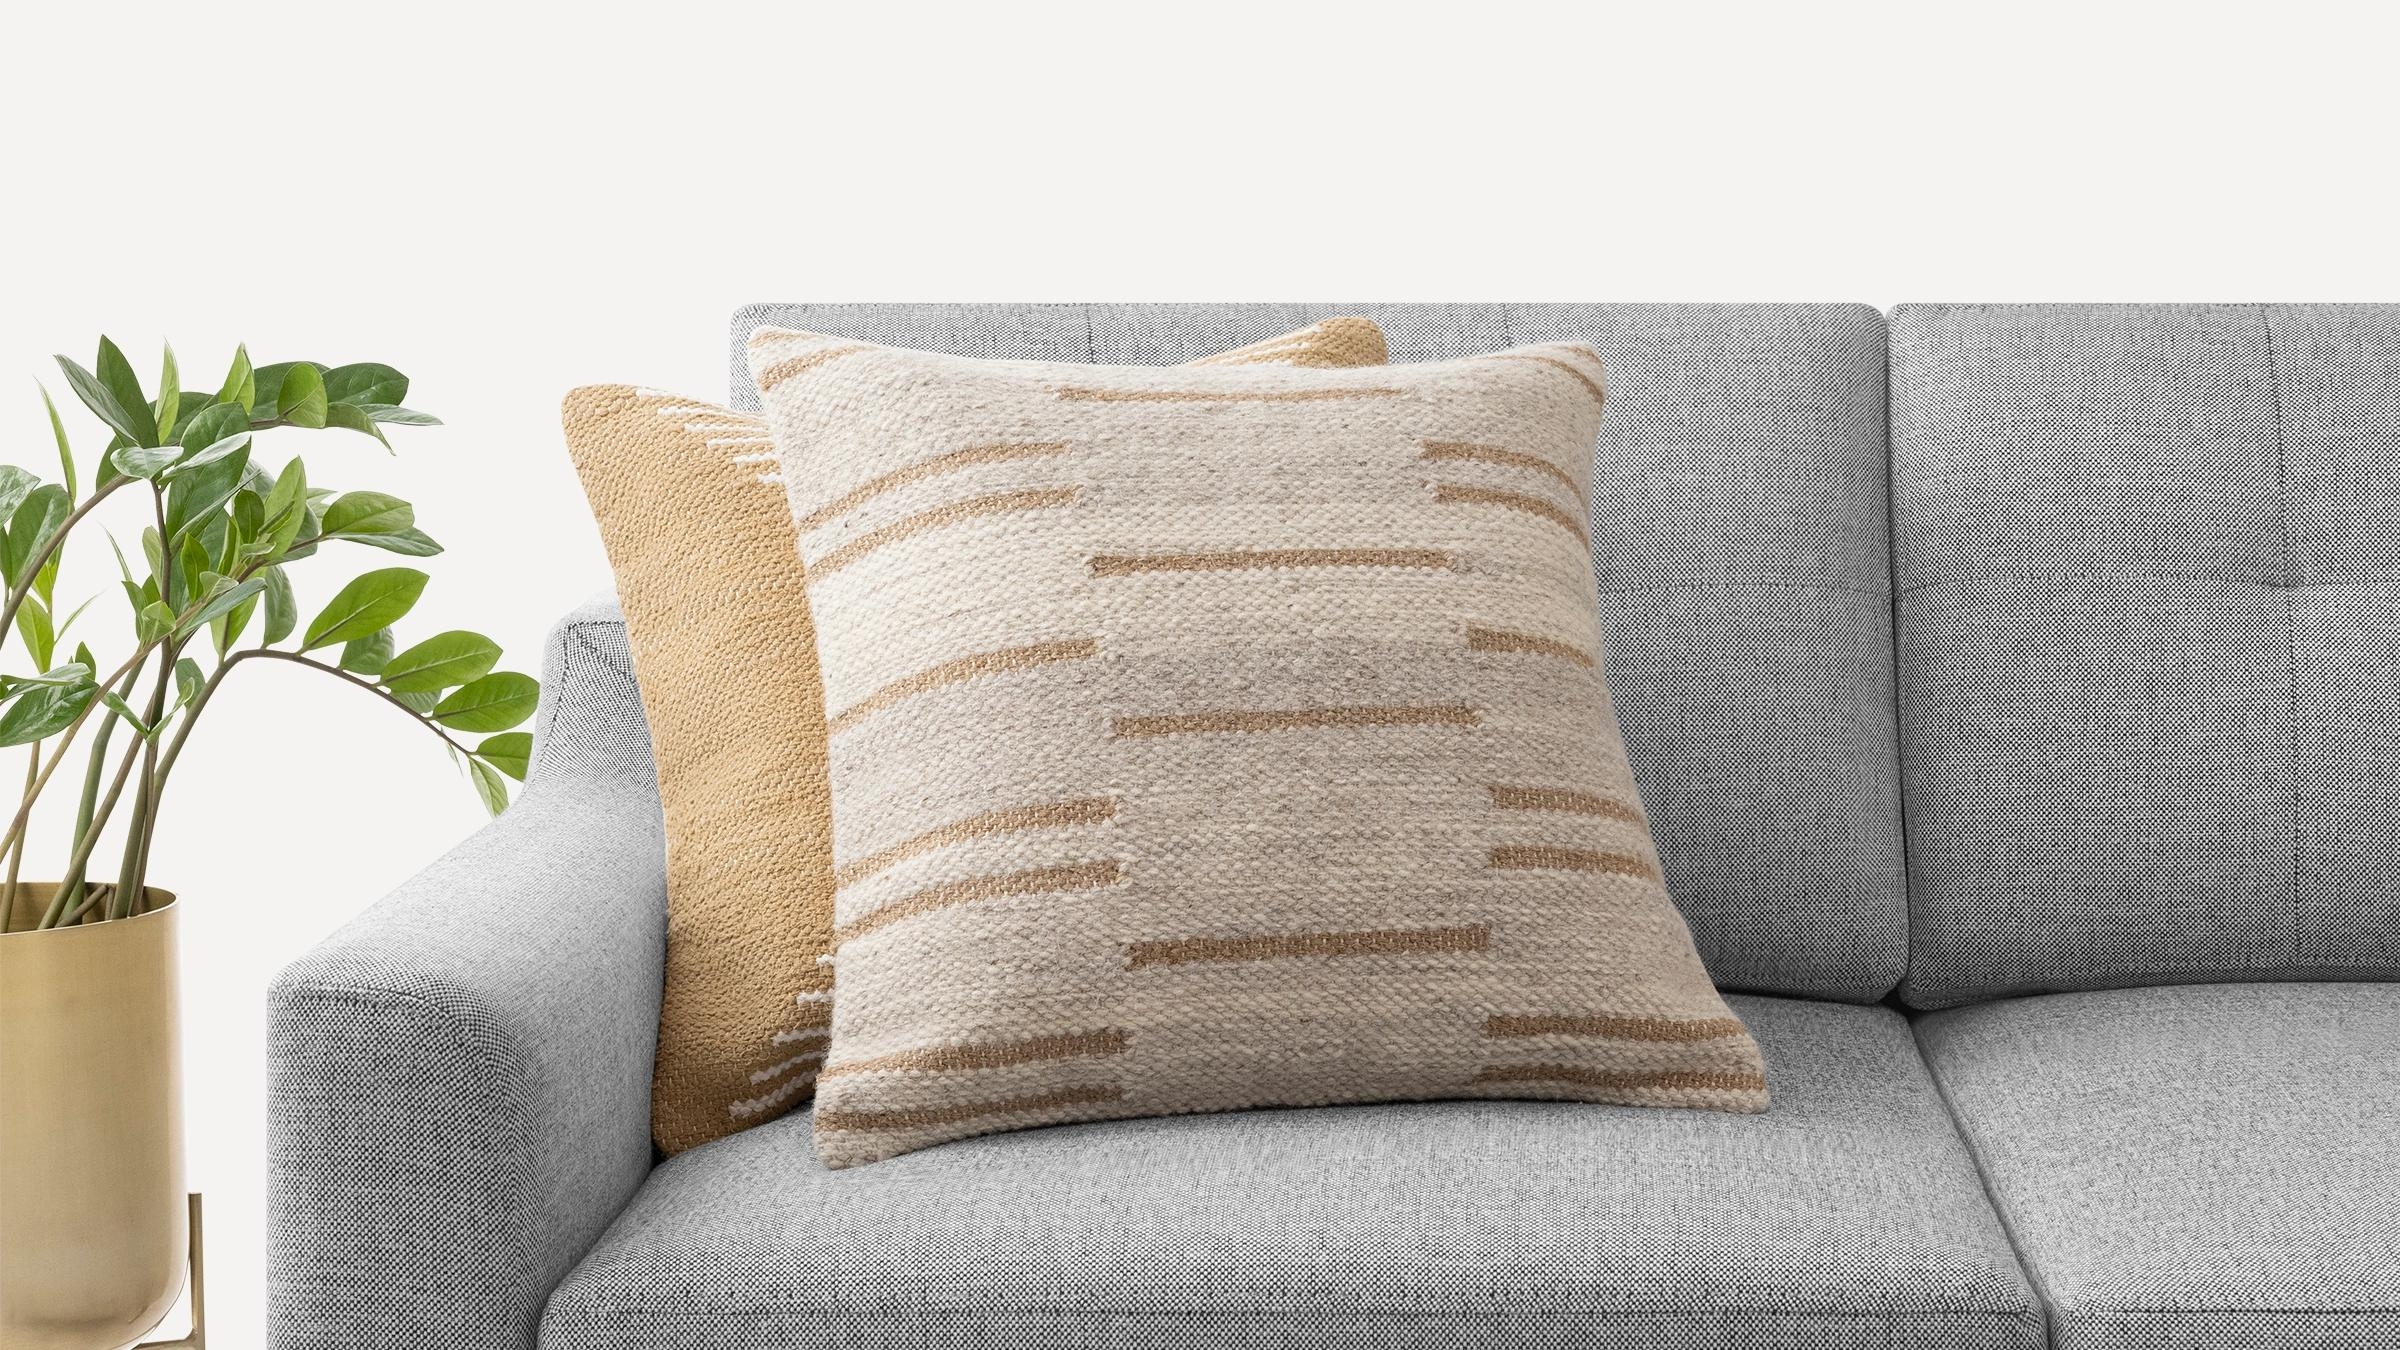 Interval Hand-tufted Pillow Cover in Beige - Image 3